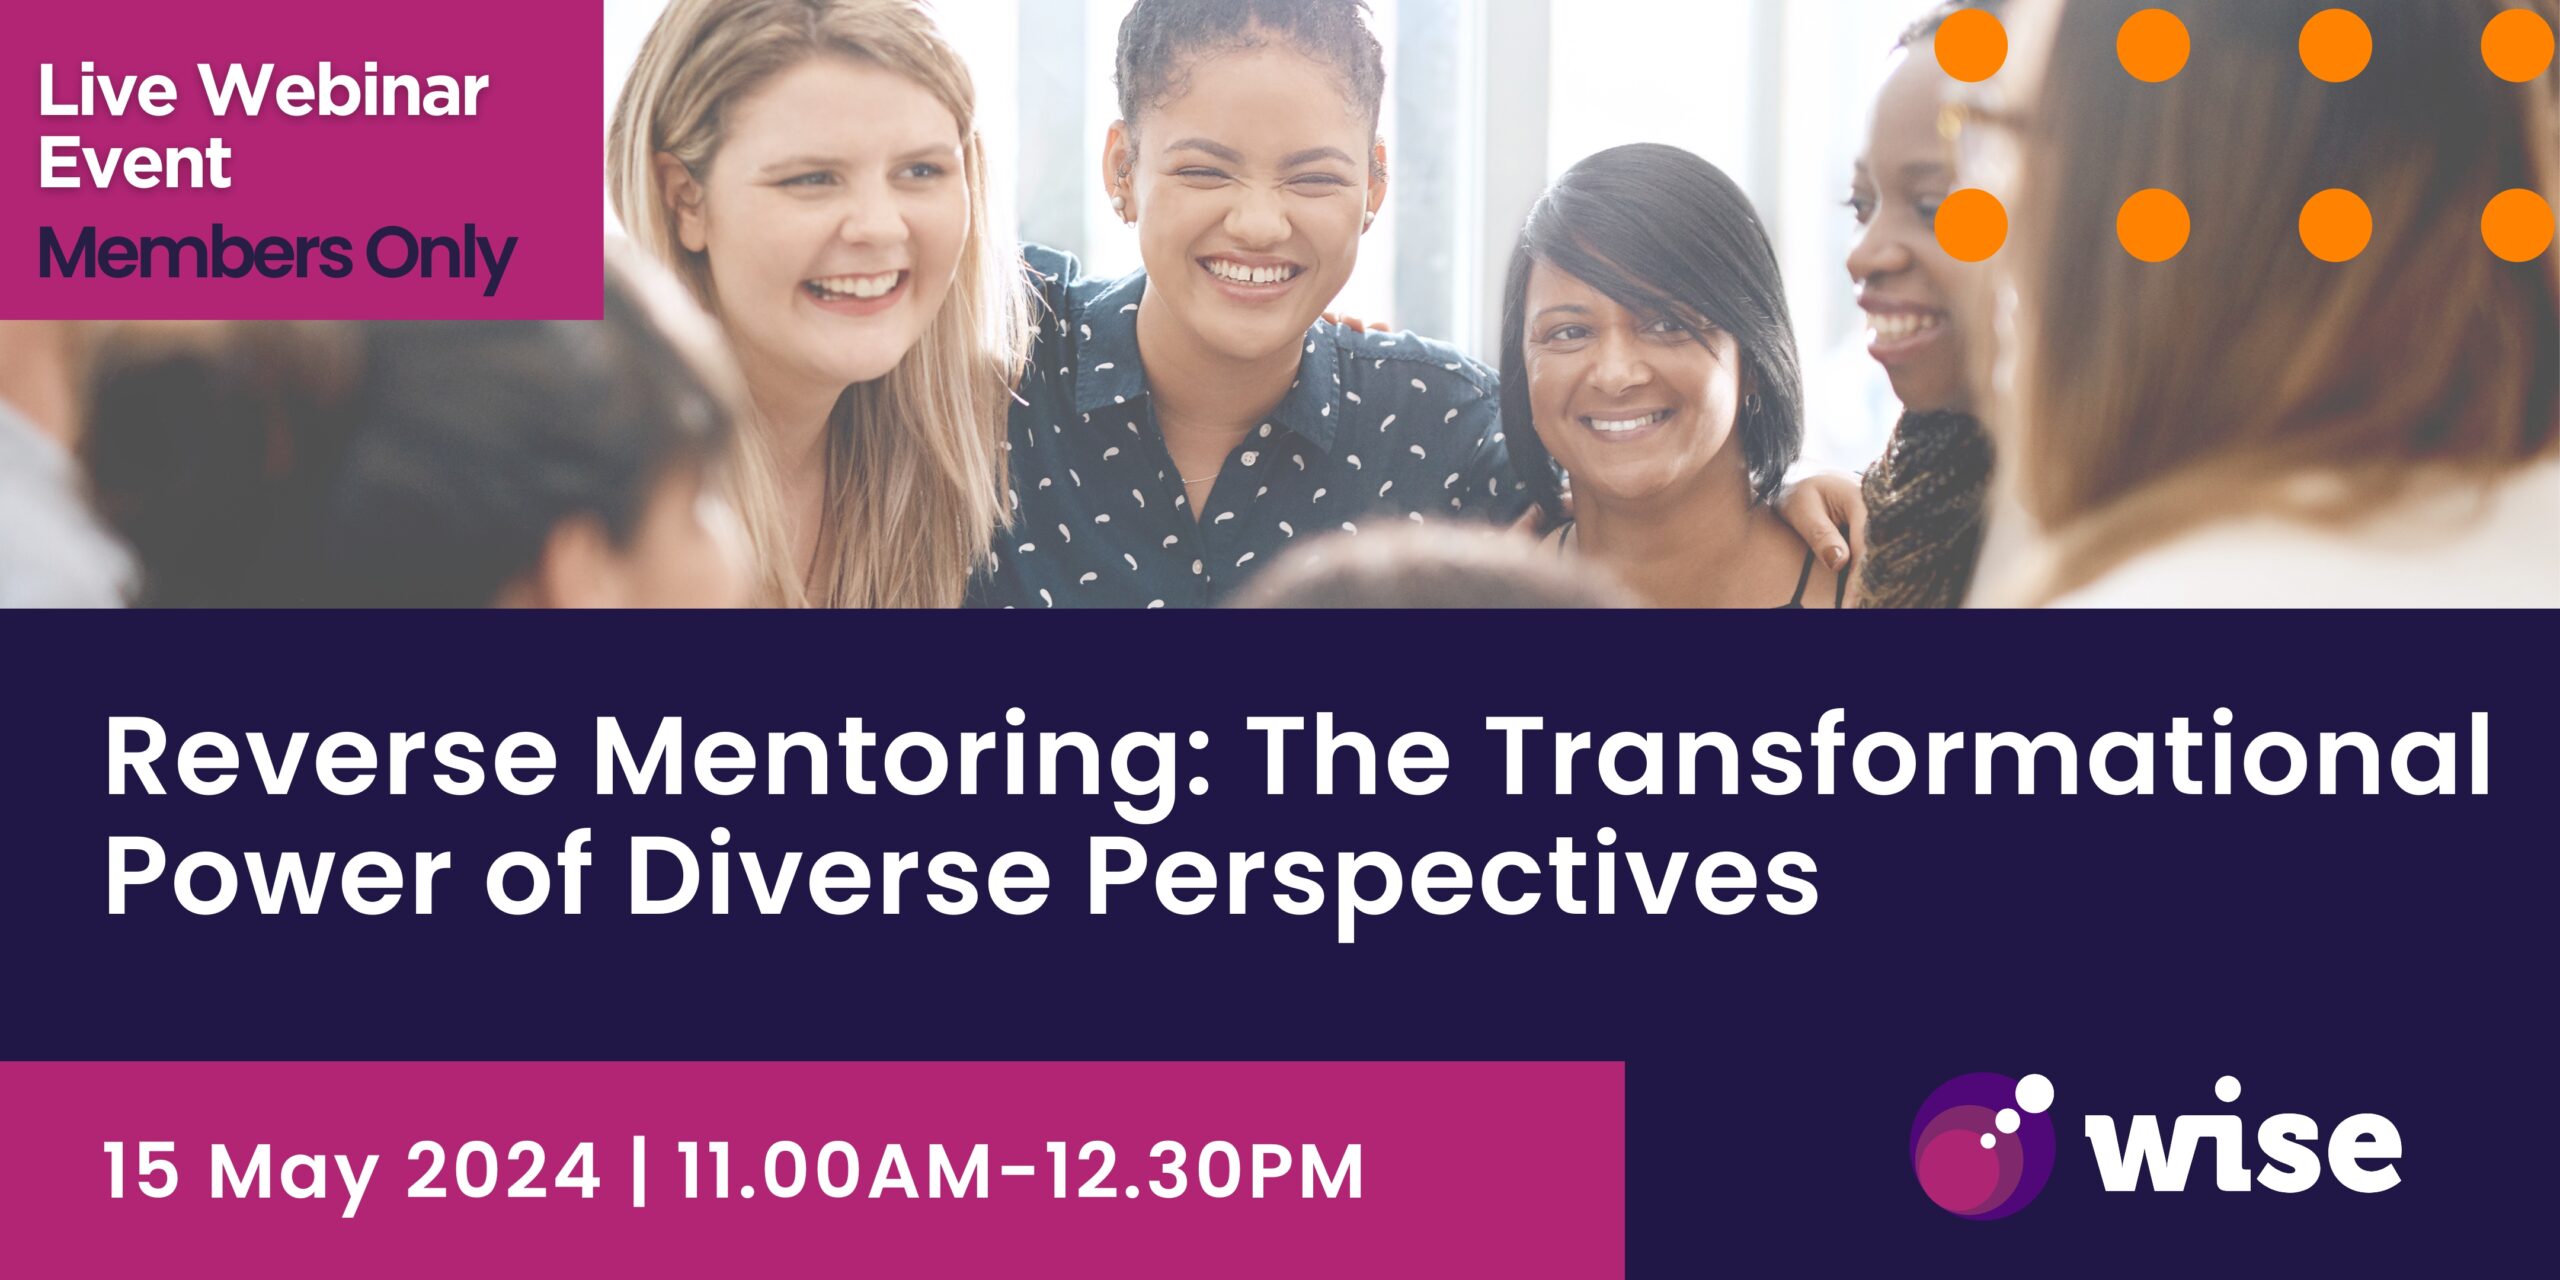 Reverse Mentoring: The Transformational Power of Diverse Perspectives